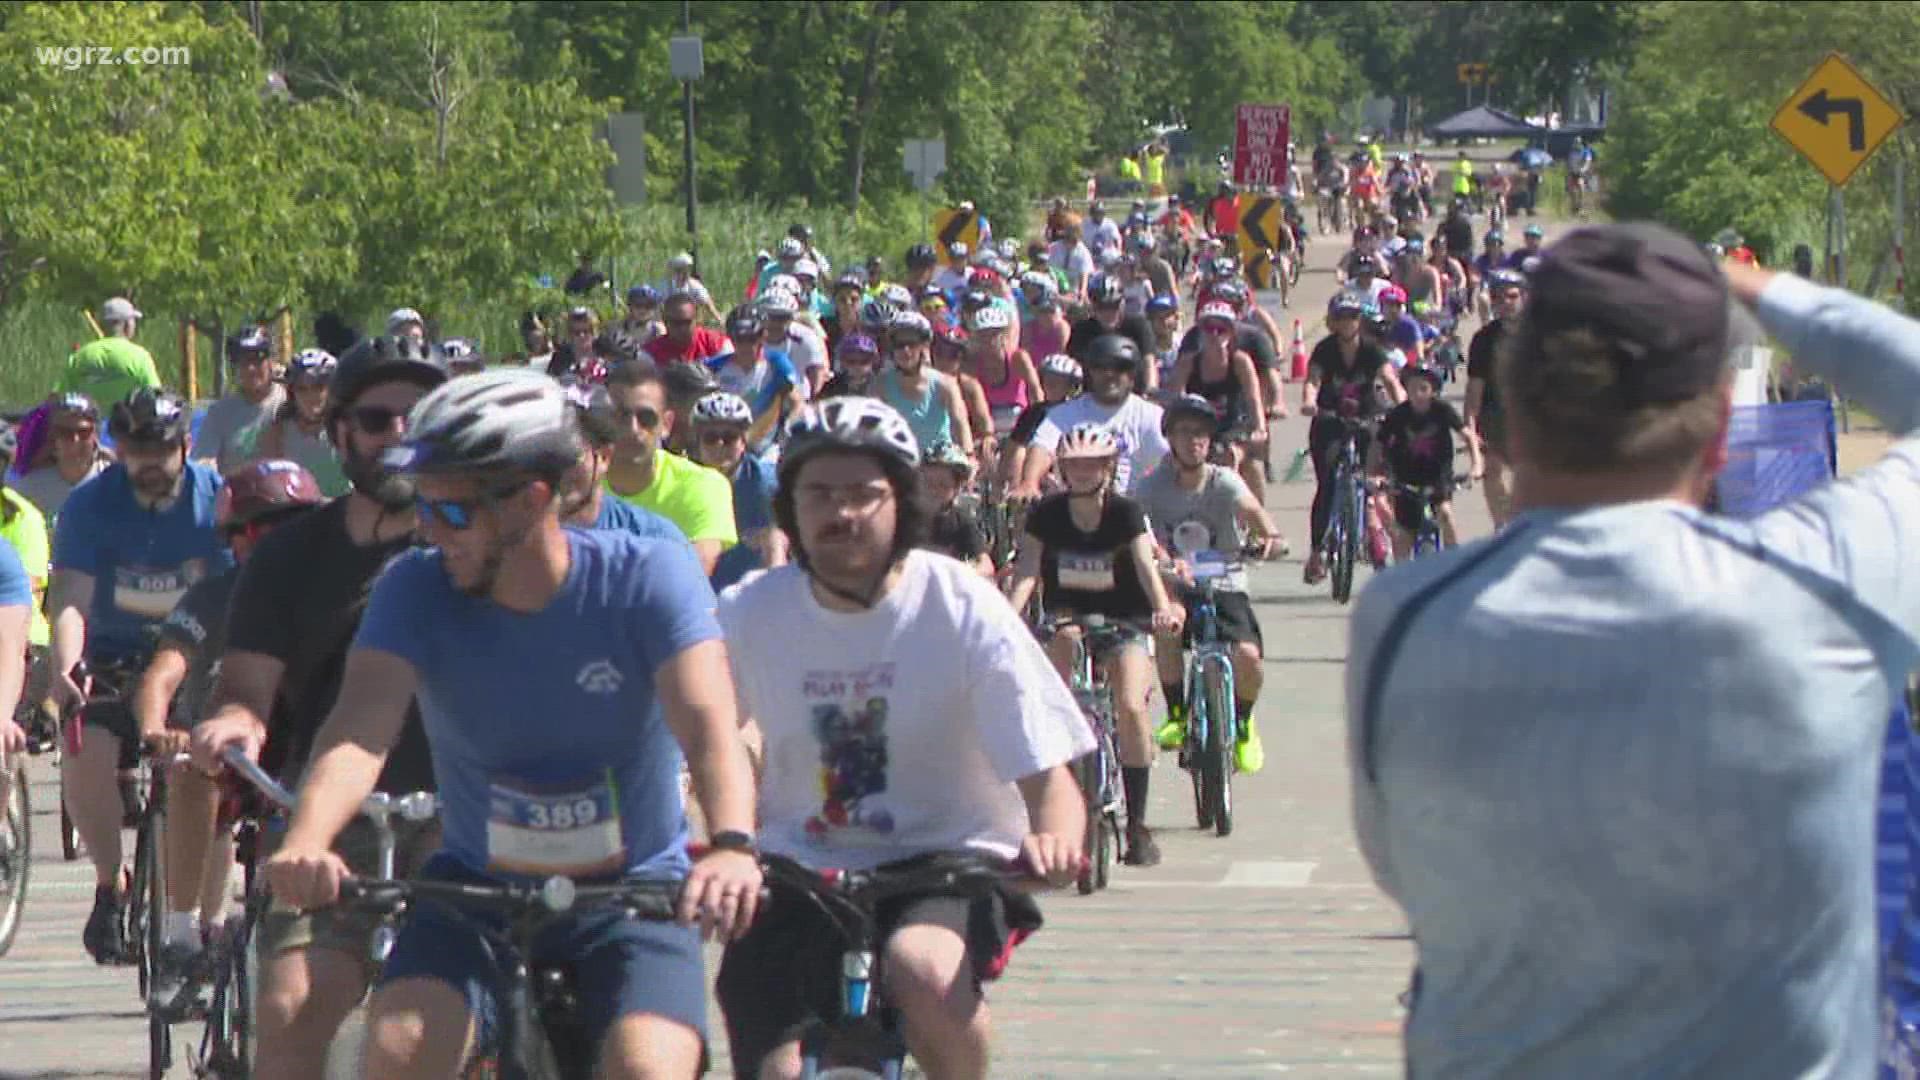 The Ride for Roswell is a massive effort involving tens of thousands of people, pedaling forward with one goal in mind: finding a cure for cancer.